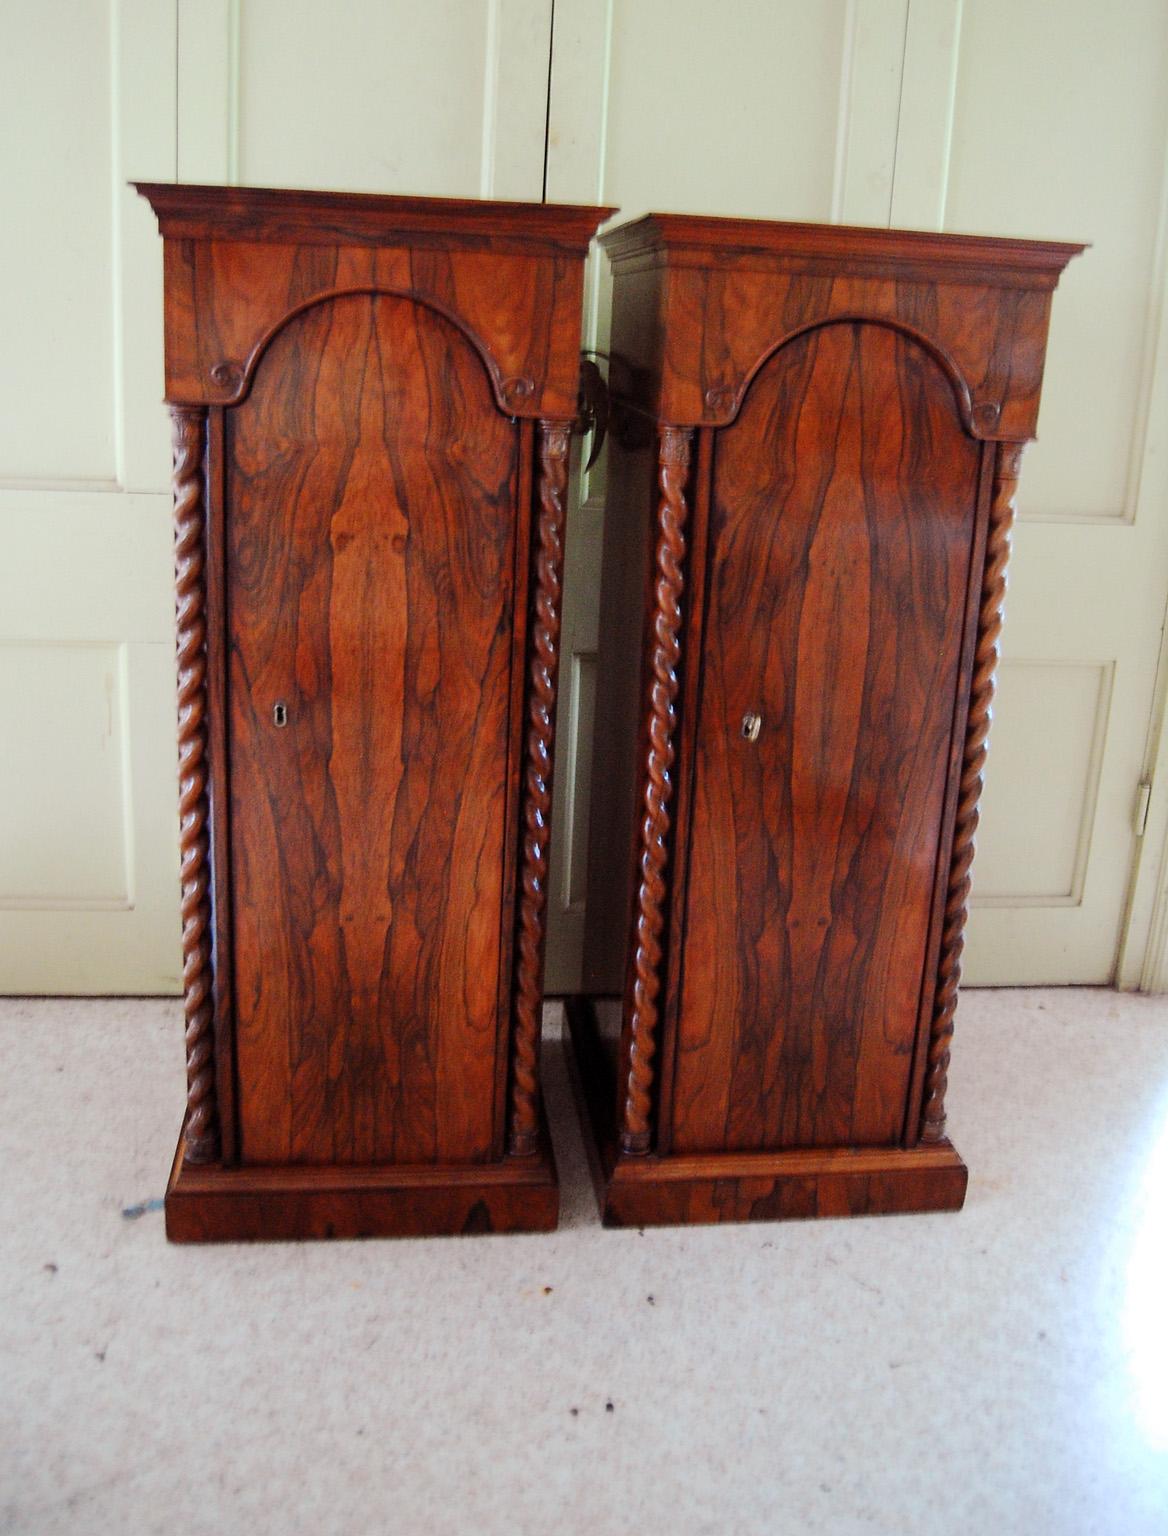 English pair of rosewood pedestal cabinets with barley twist carved columns, cathedral arched hinged doors, interior shelves on plinth bases. The graining of the rosewood is stupendous with book matched veneers to the front of each pedestal. These